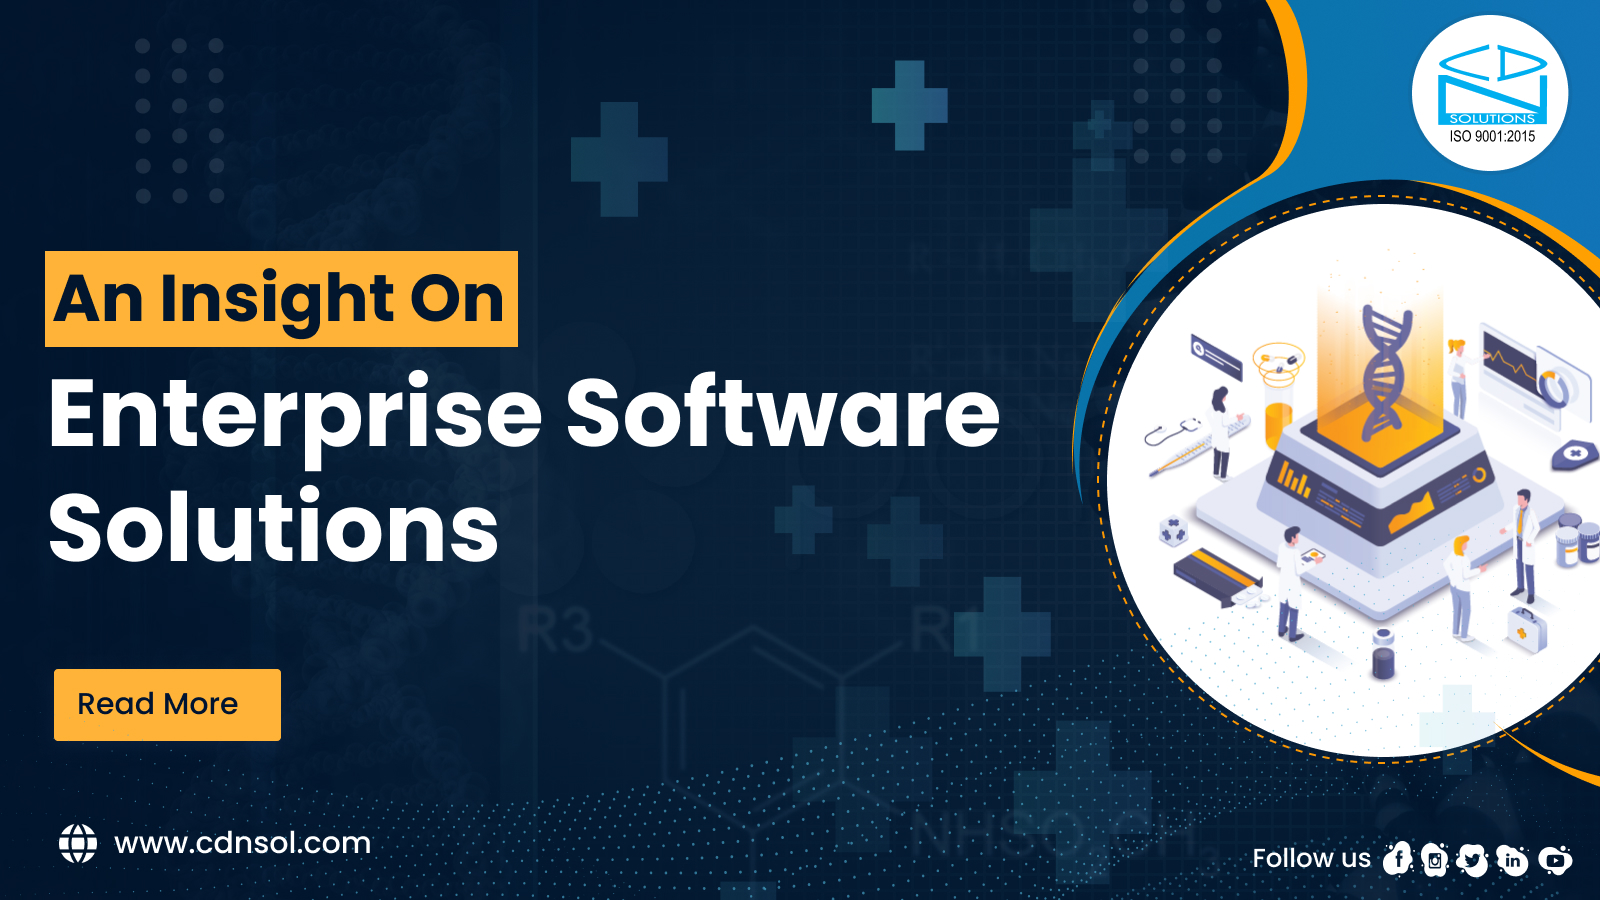 An Insight On Enterprise Software Solutions